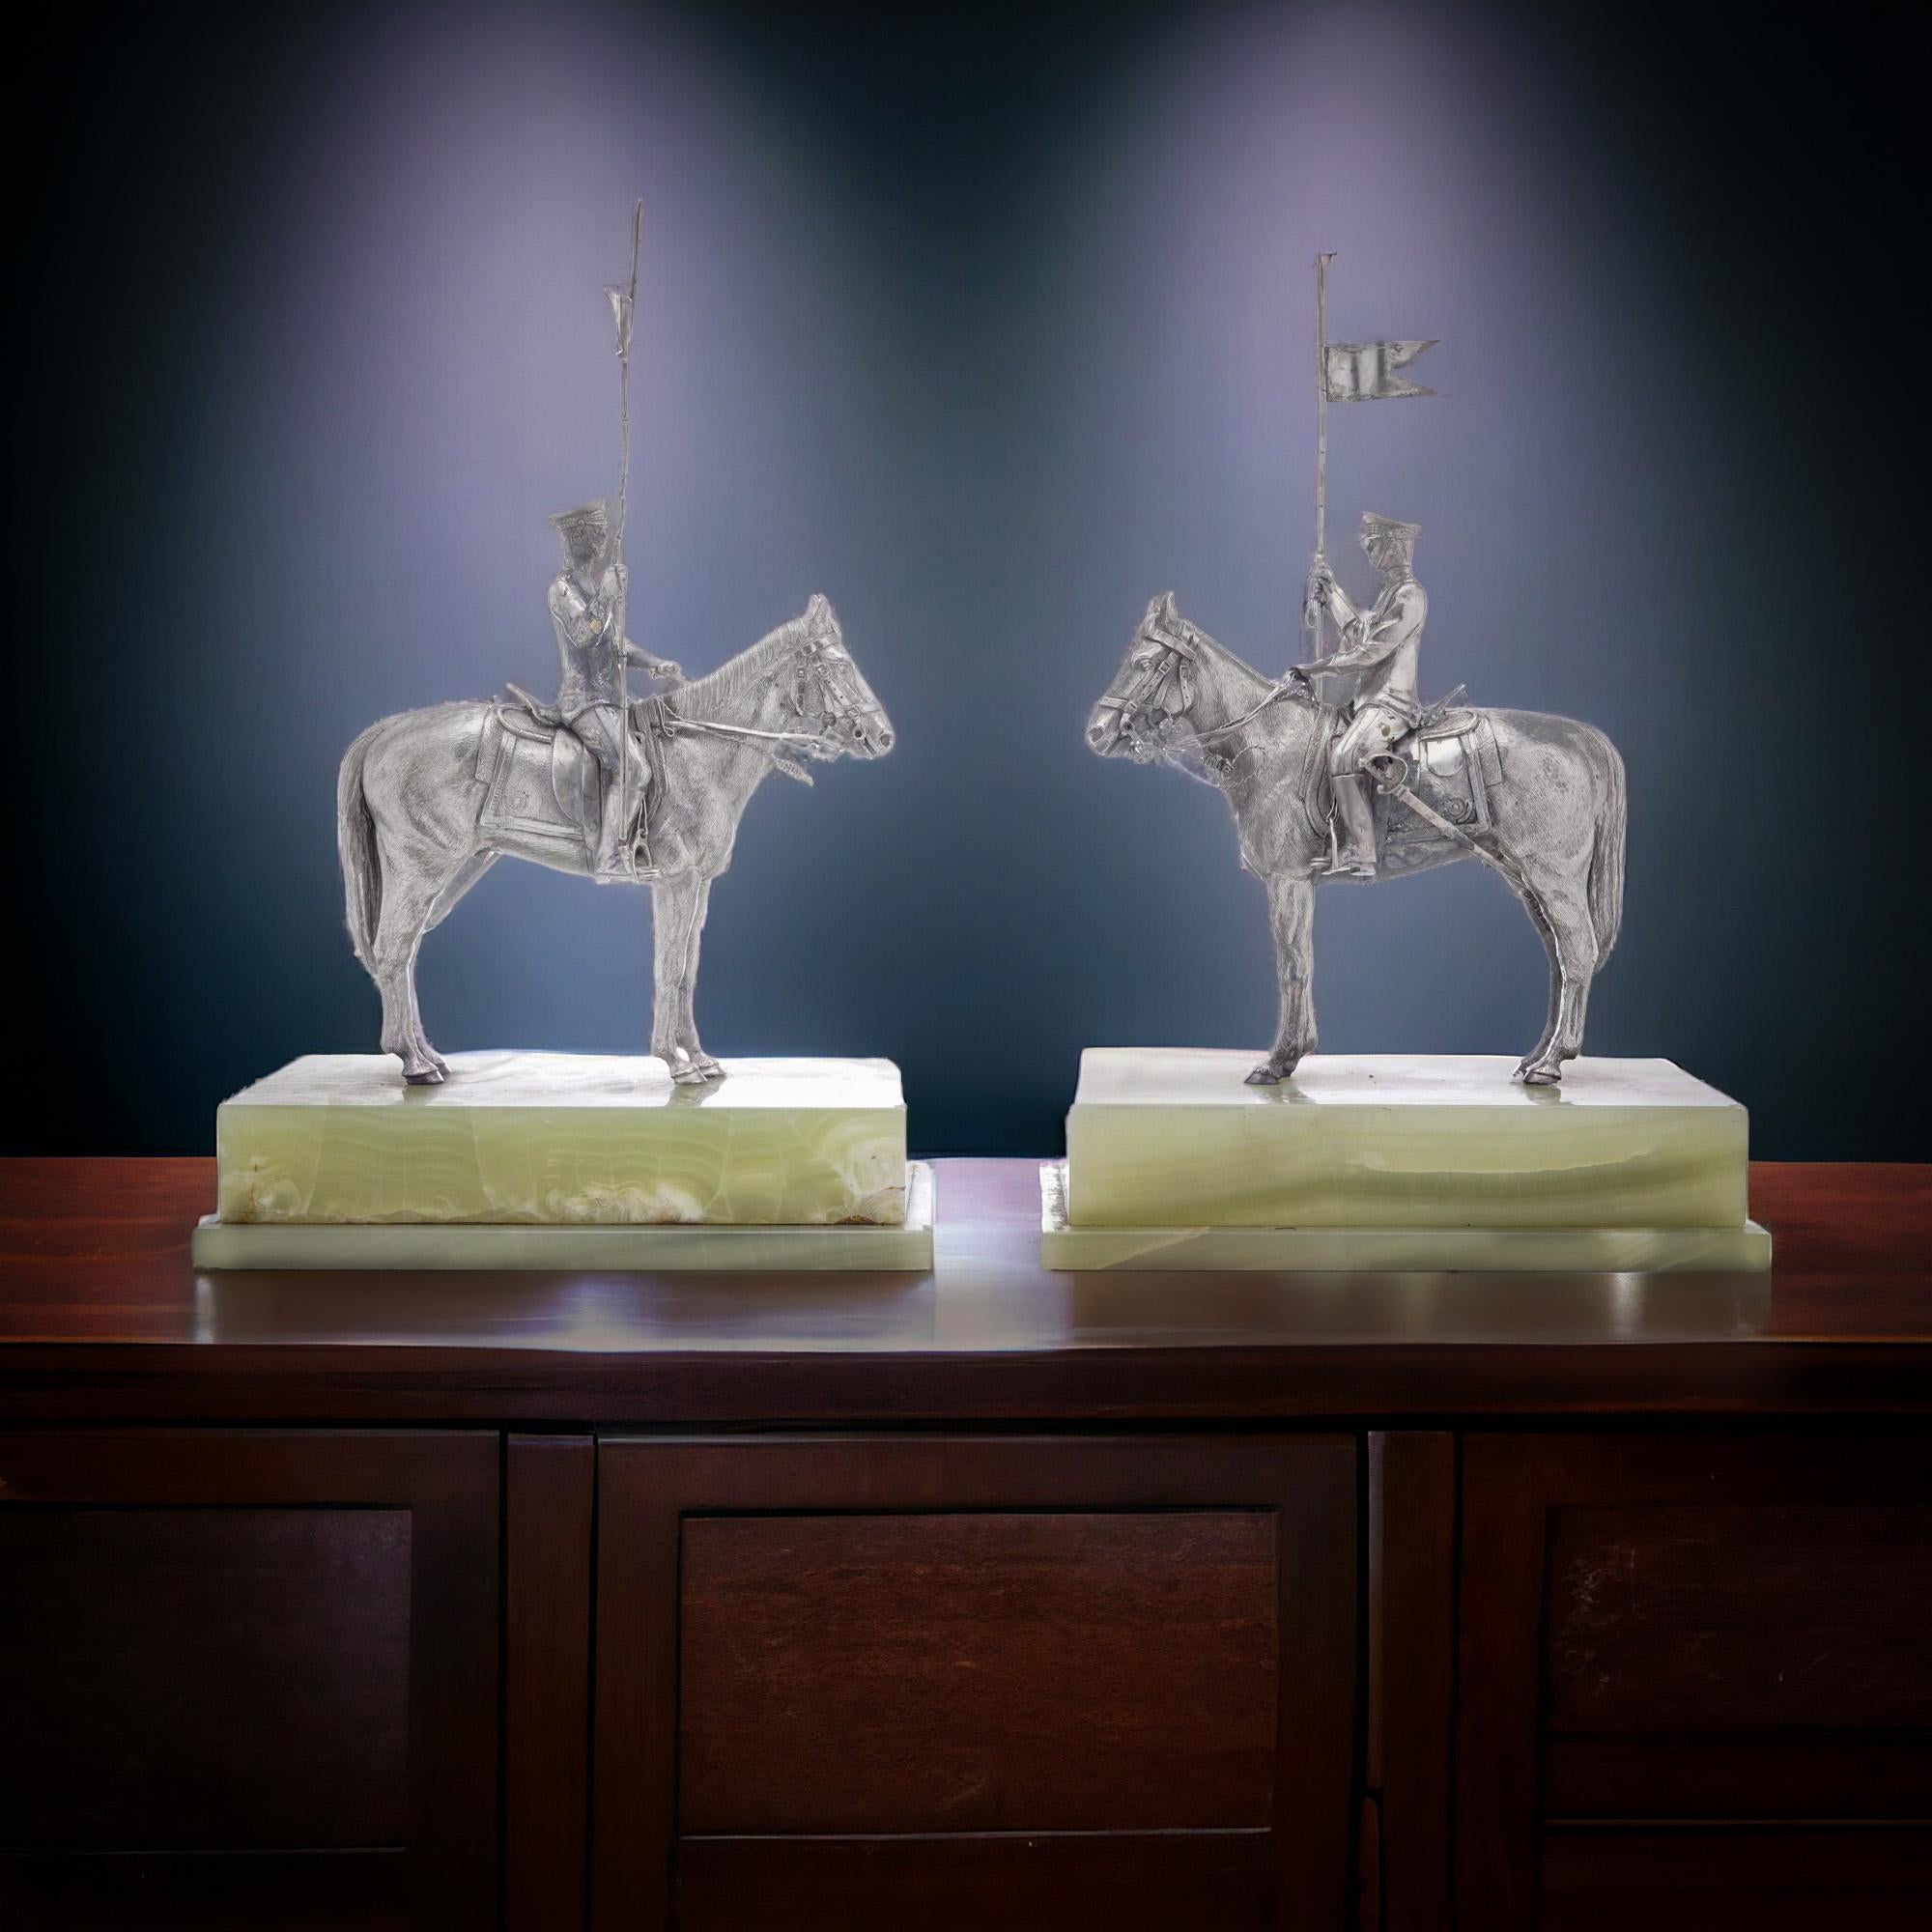 Asprey pair or horseriding solid silver figurines on marble bases
Made London, 1977
Maker: Asprey & Co
Fully hallmarked.

Size: 14.9 x 7.8 x 22.5 cm
Weight: 2812 grams total (1406 grams each)

Condition: Figurines have minor signs of usage,